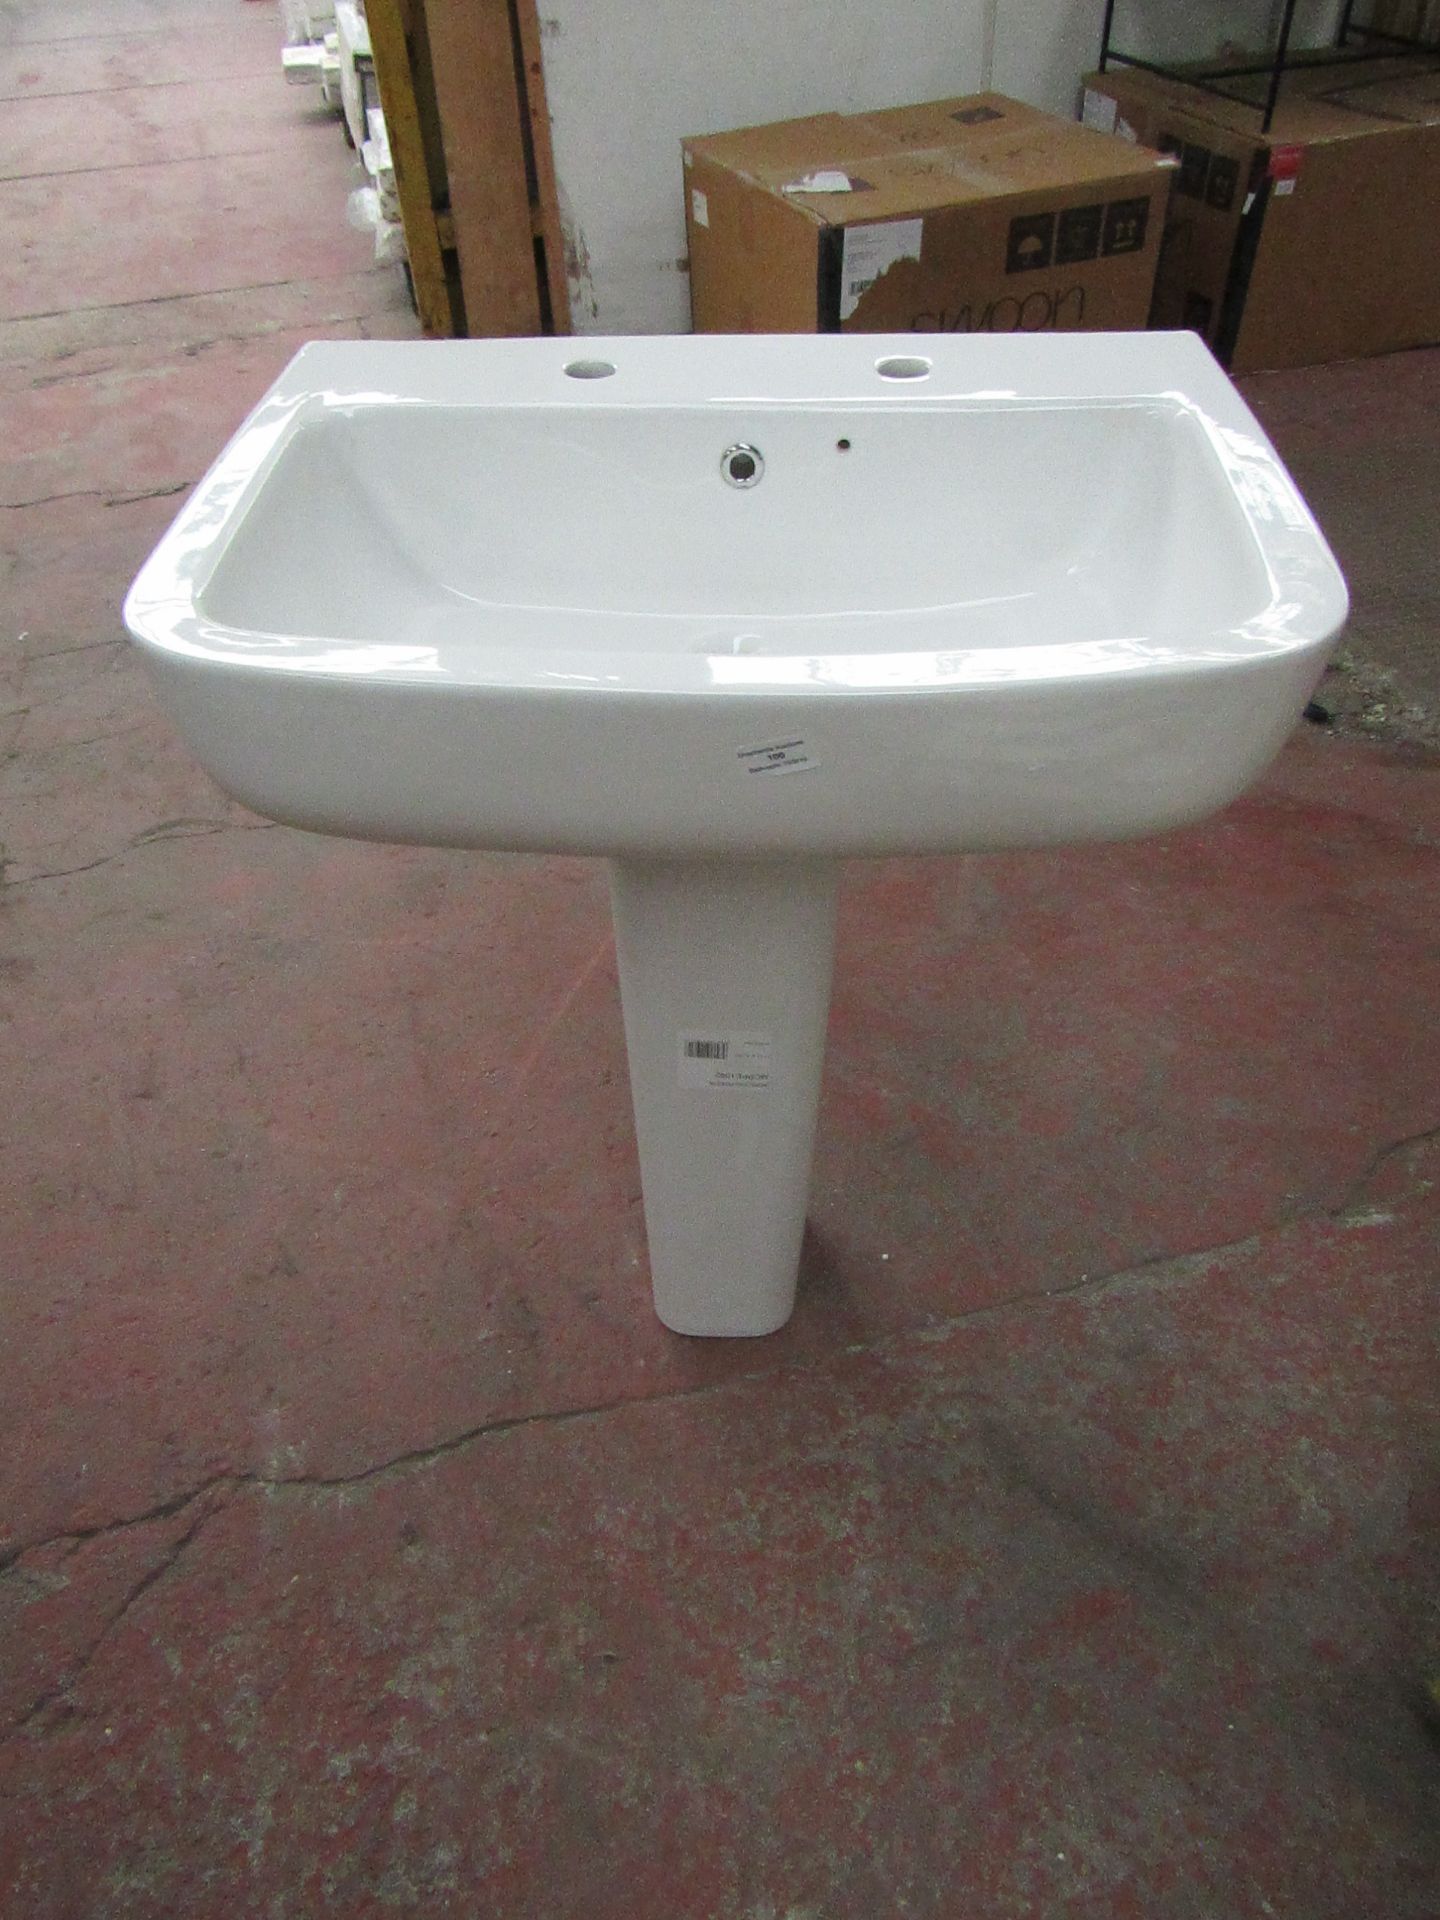 Lecico Senner 54cm 2 tap hole sink with a Neroli Full pedestal that appear to match fine, all new.